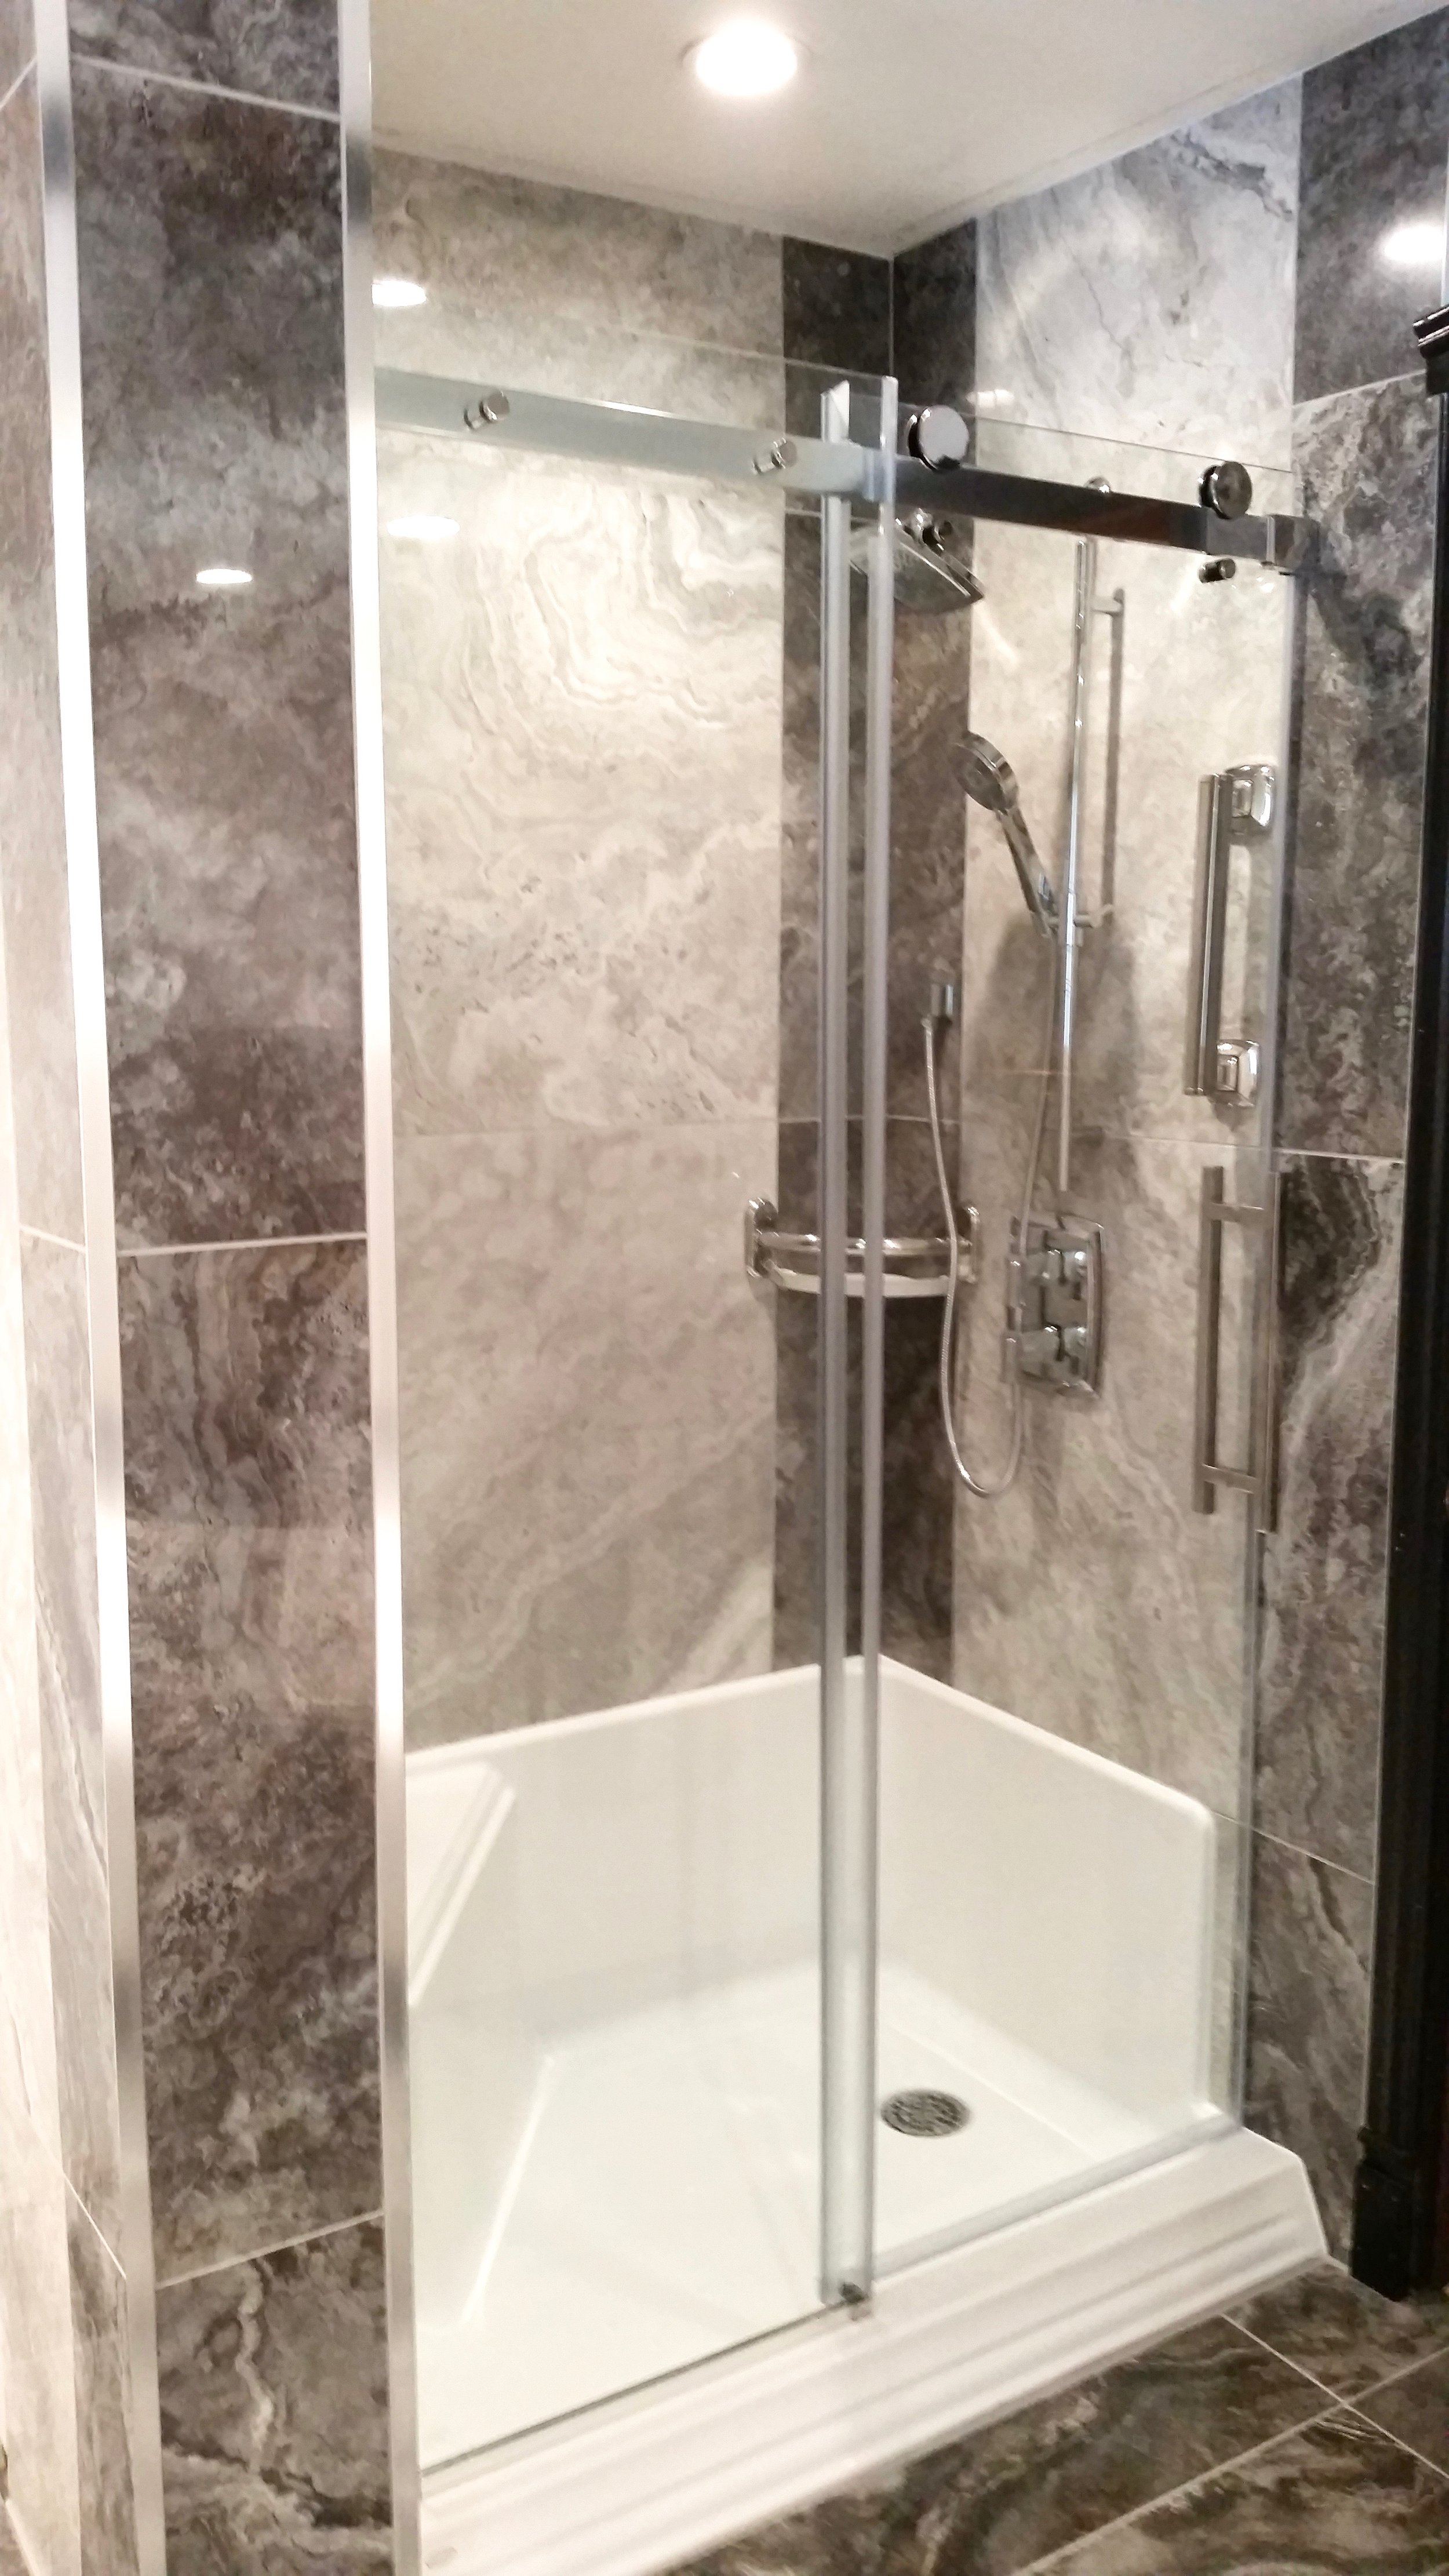 Shower stall with custom glass